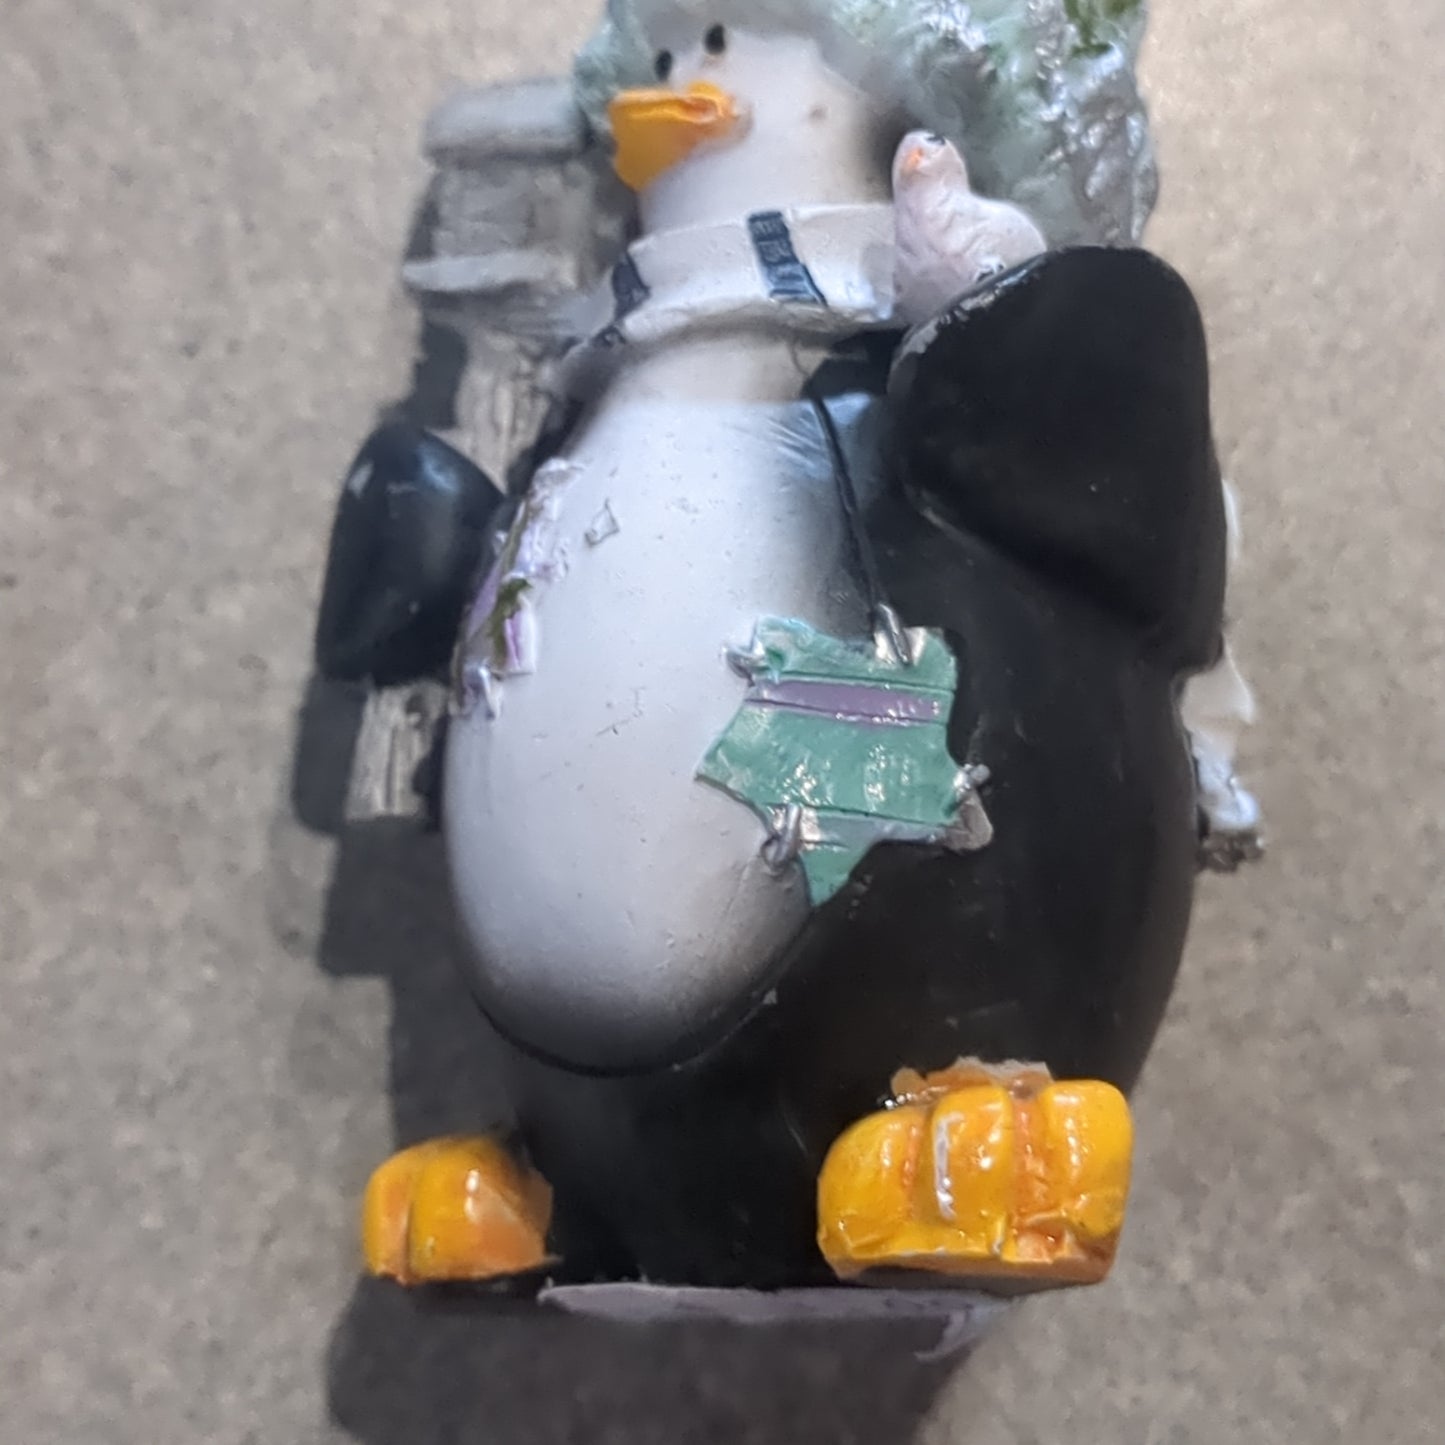 Penguin ornament with a bird and a birdhouse